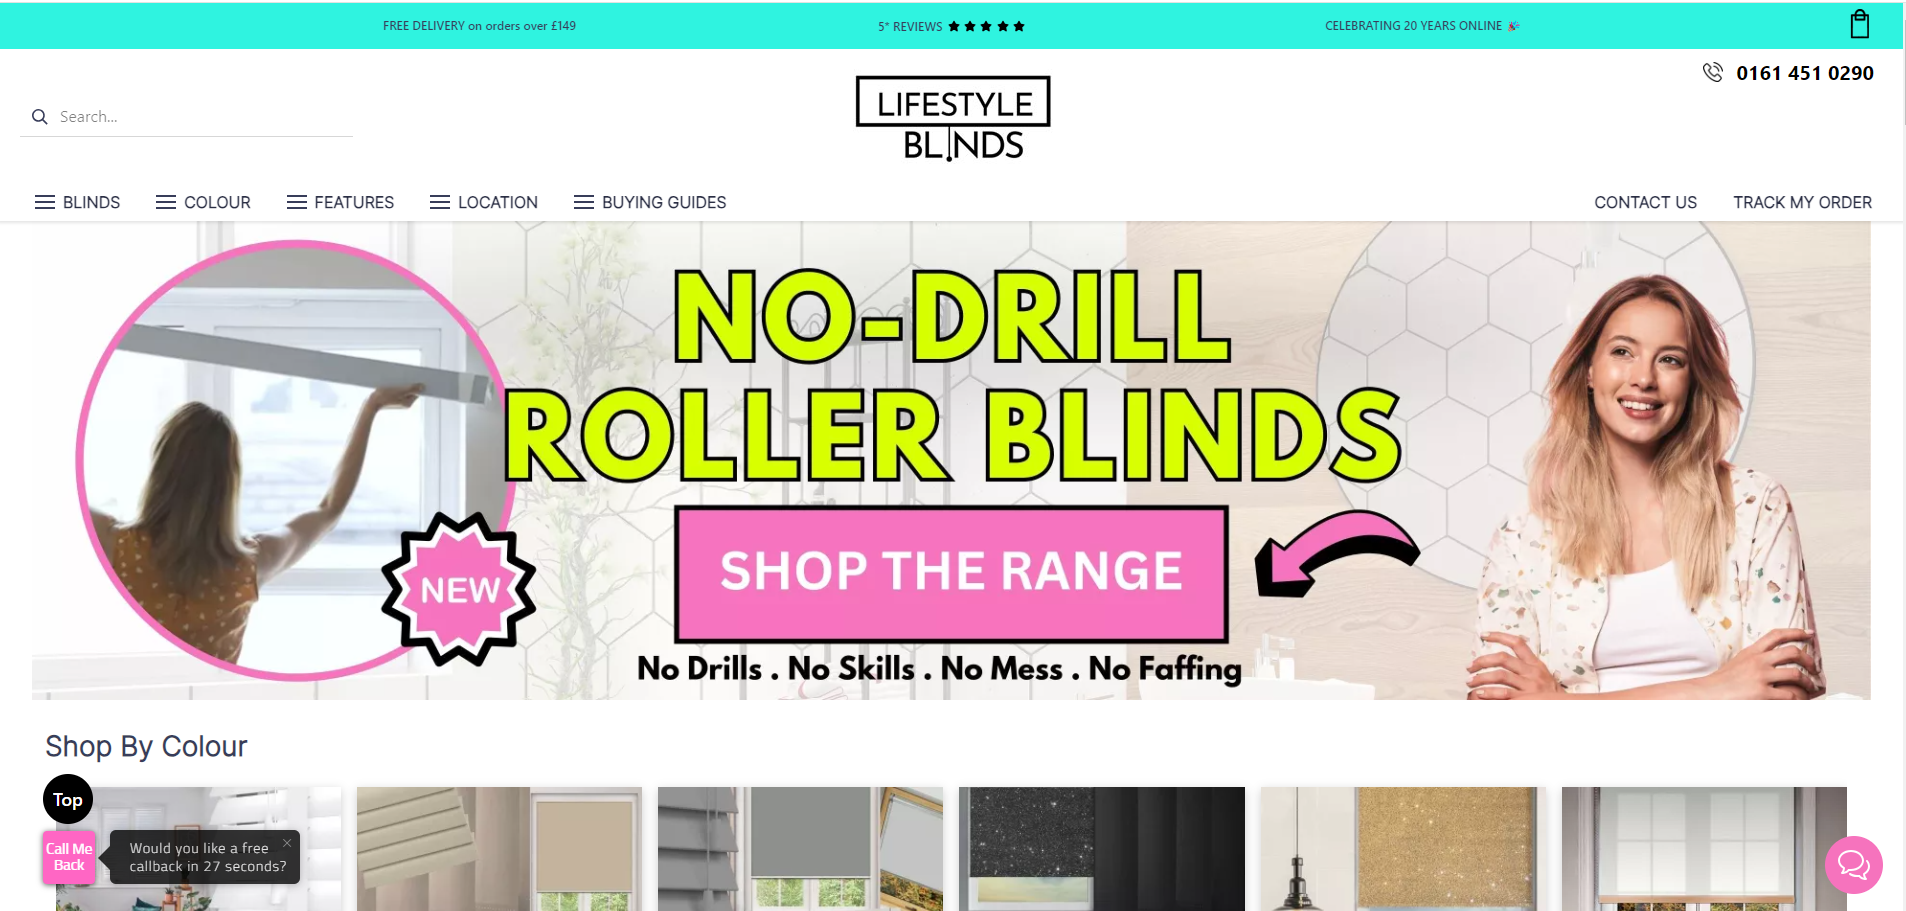 Lifestyle Blinds Celebrates 20 Years with Launch of New Website